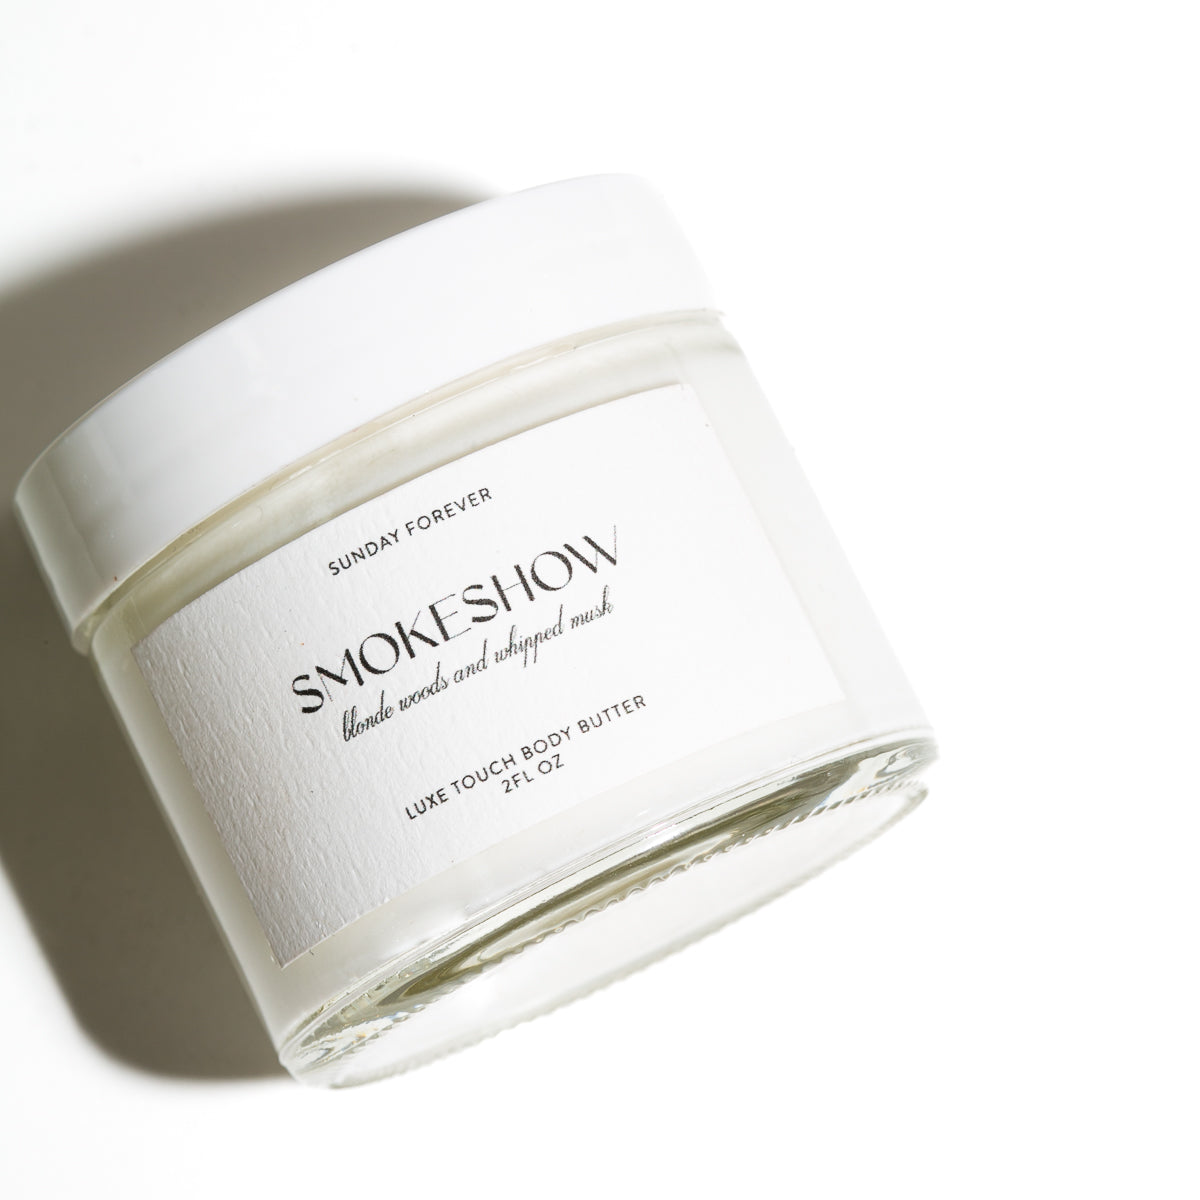 Sunday Forever Smokeshow Body Butter